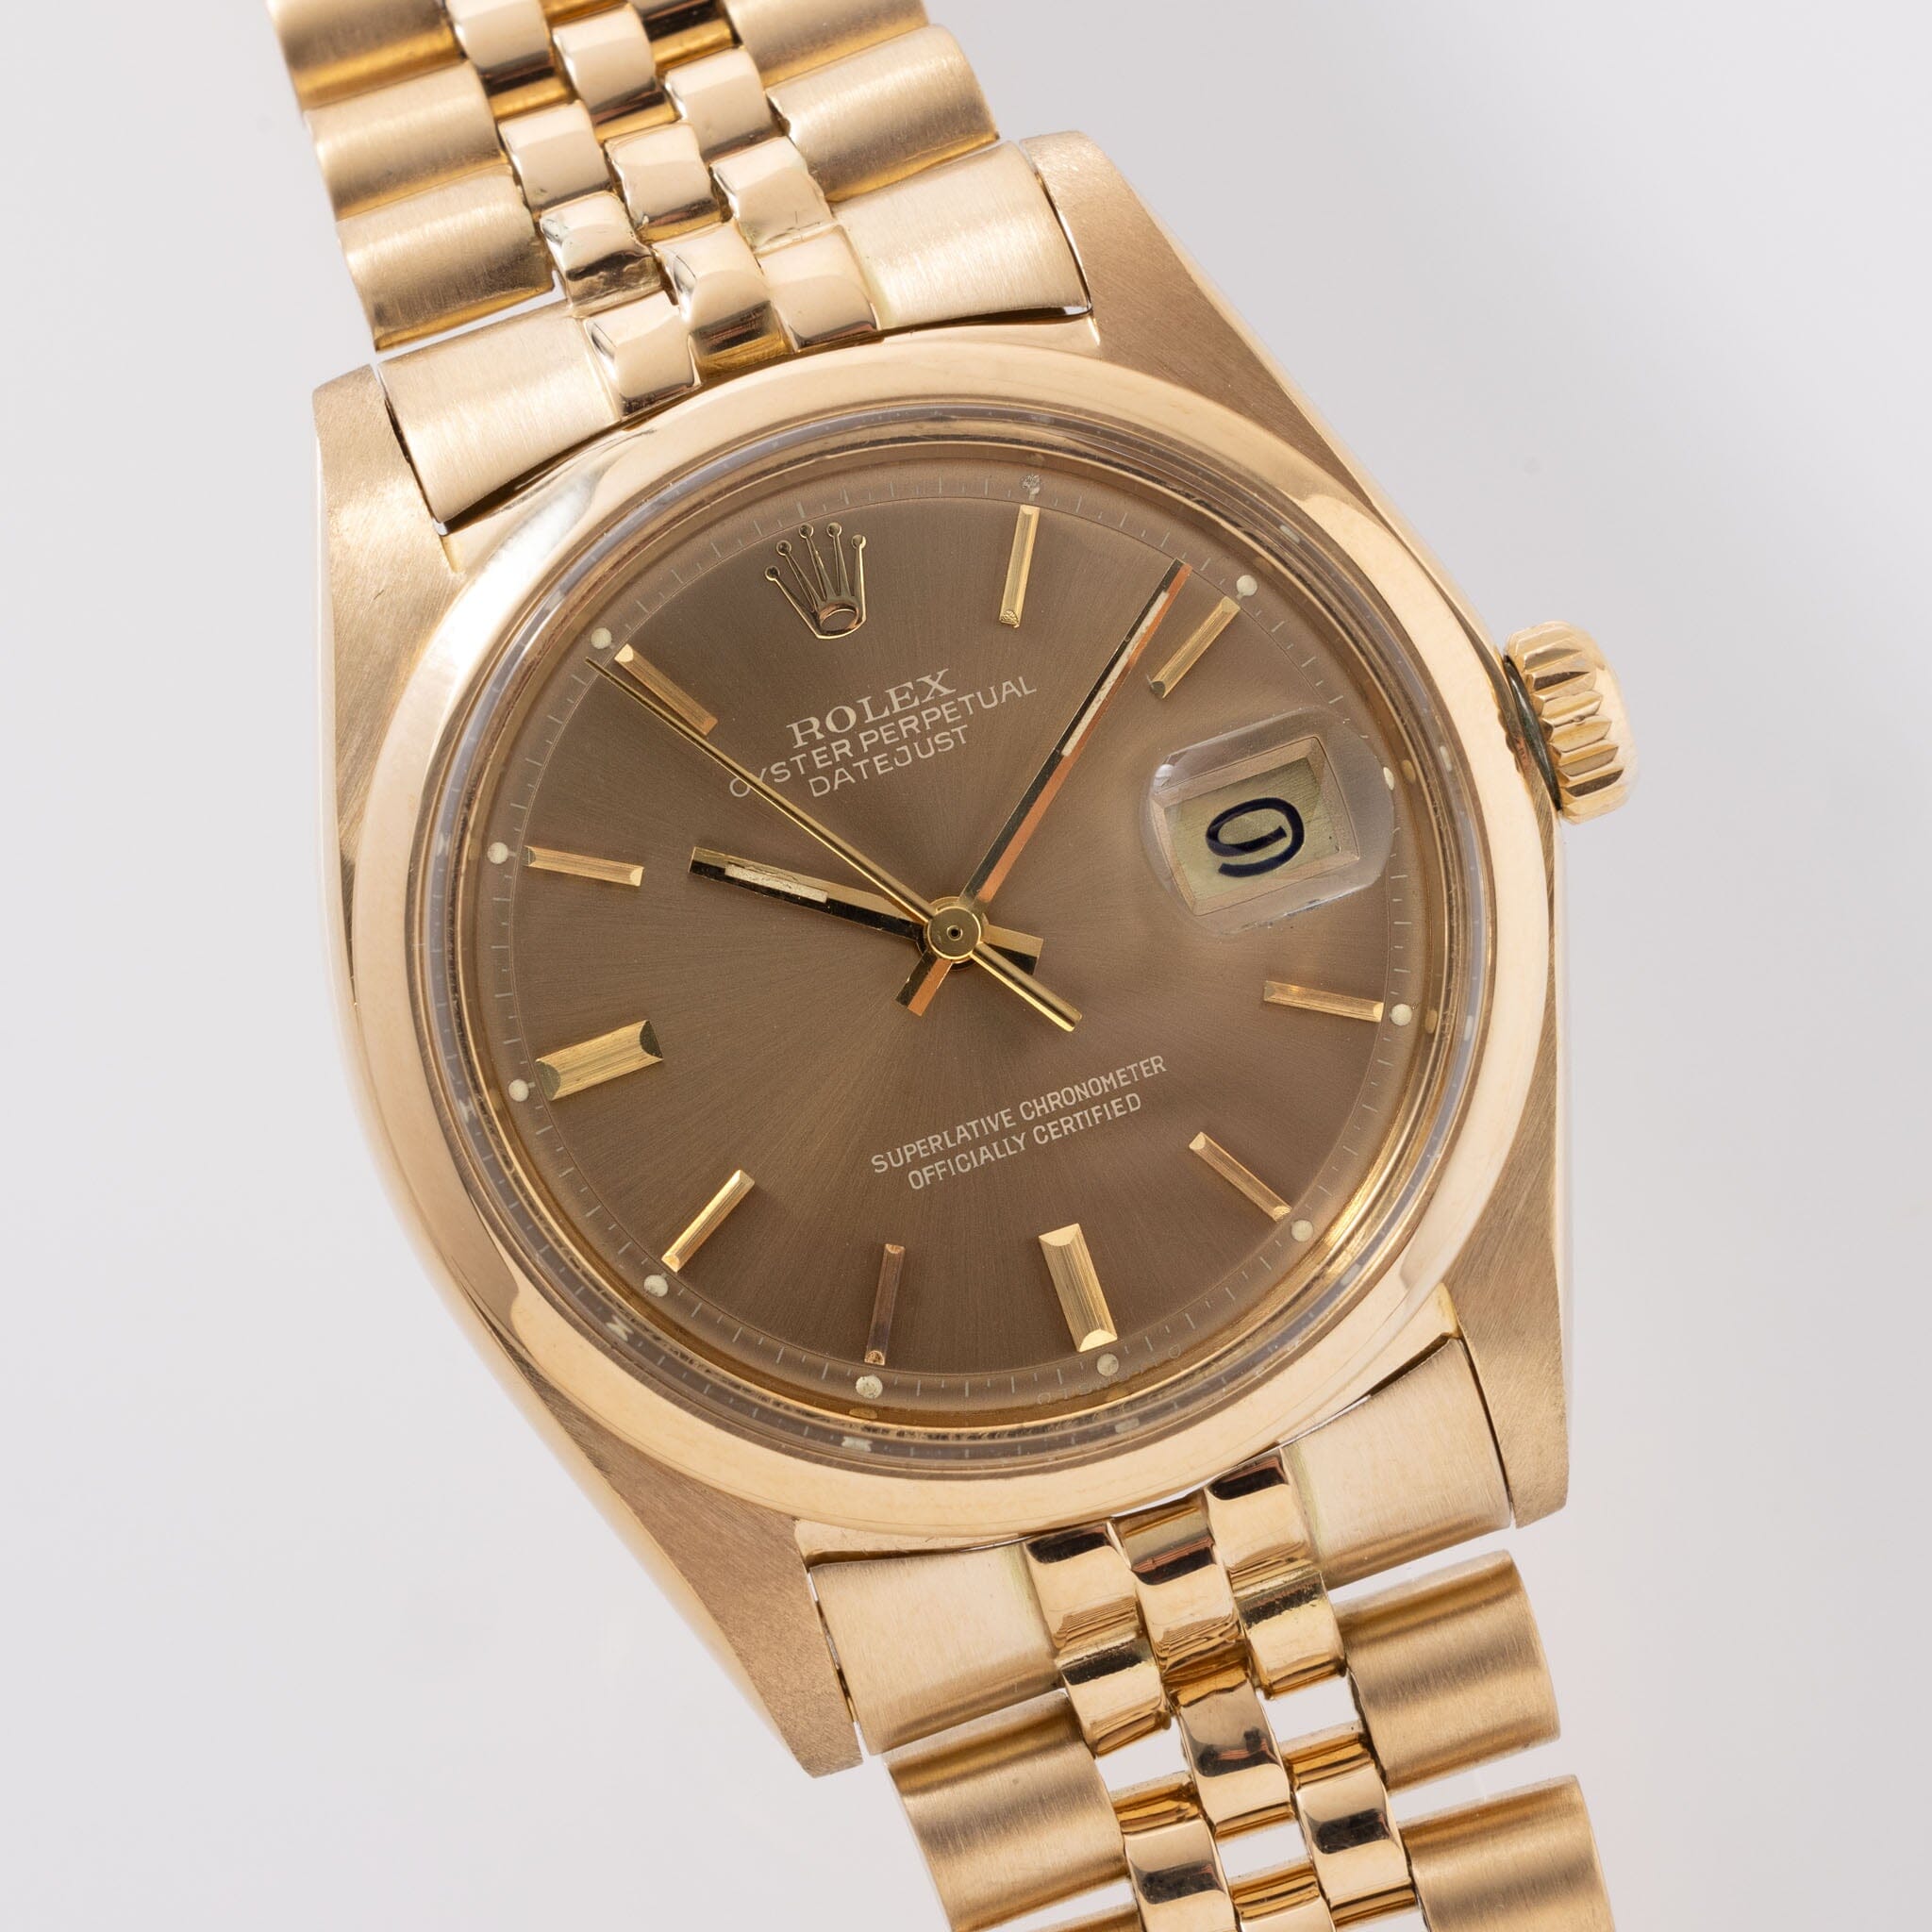 Rolex Datejust Yellow Gold Cappuccino Dial Ref 1600